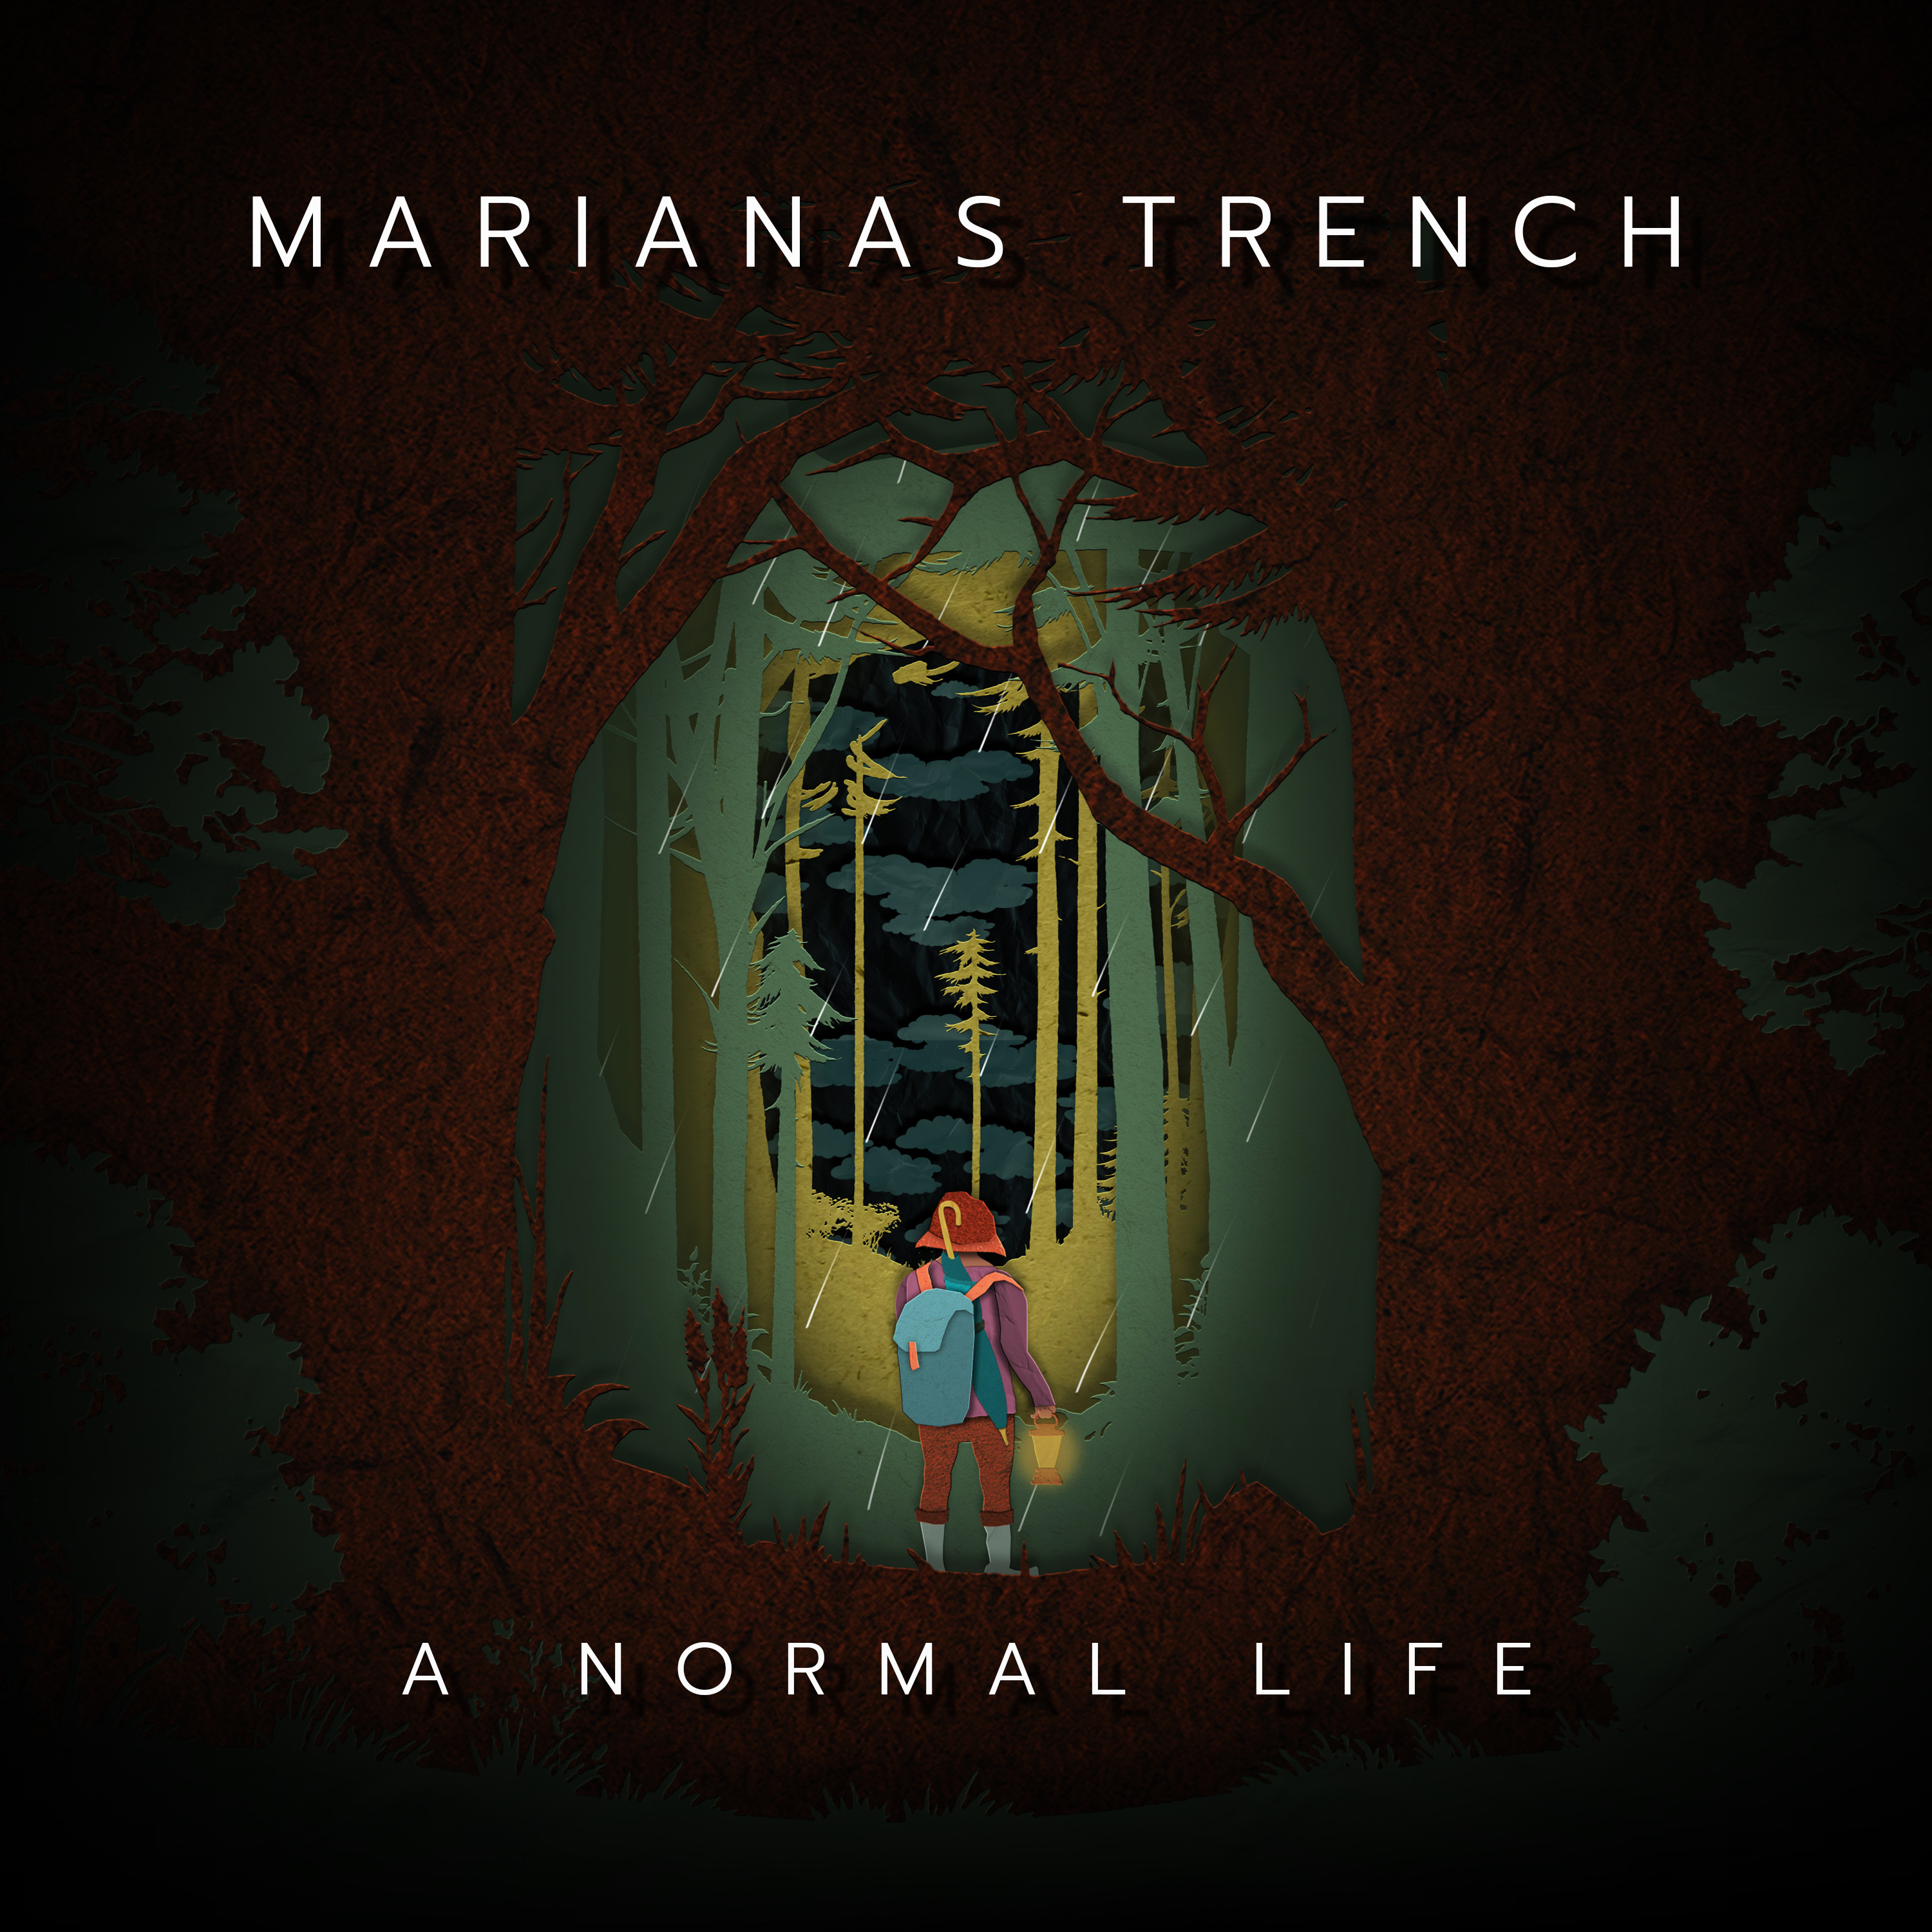 Exploring A Normal Life by Marianas Trench: An Ode to Internal Conflict and Self-Acceptance